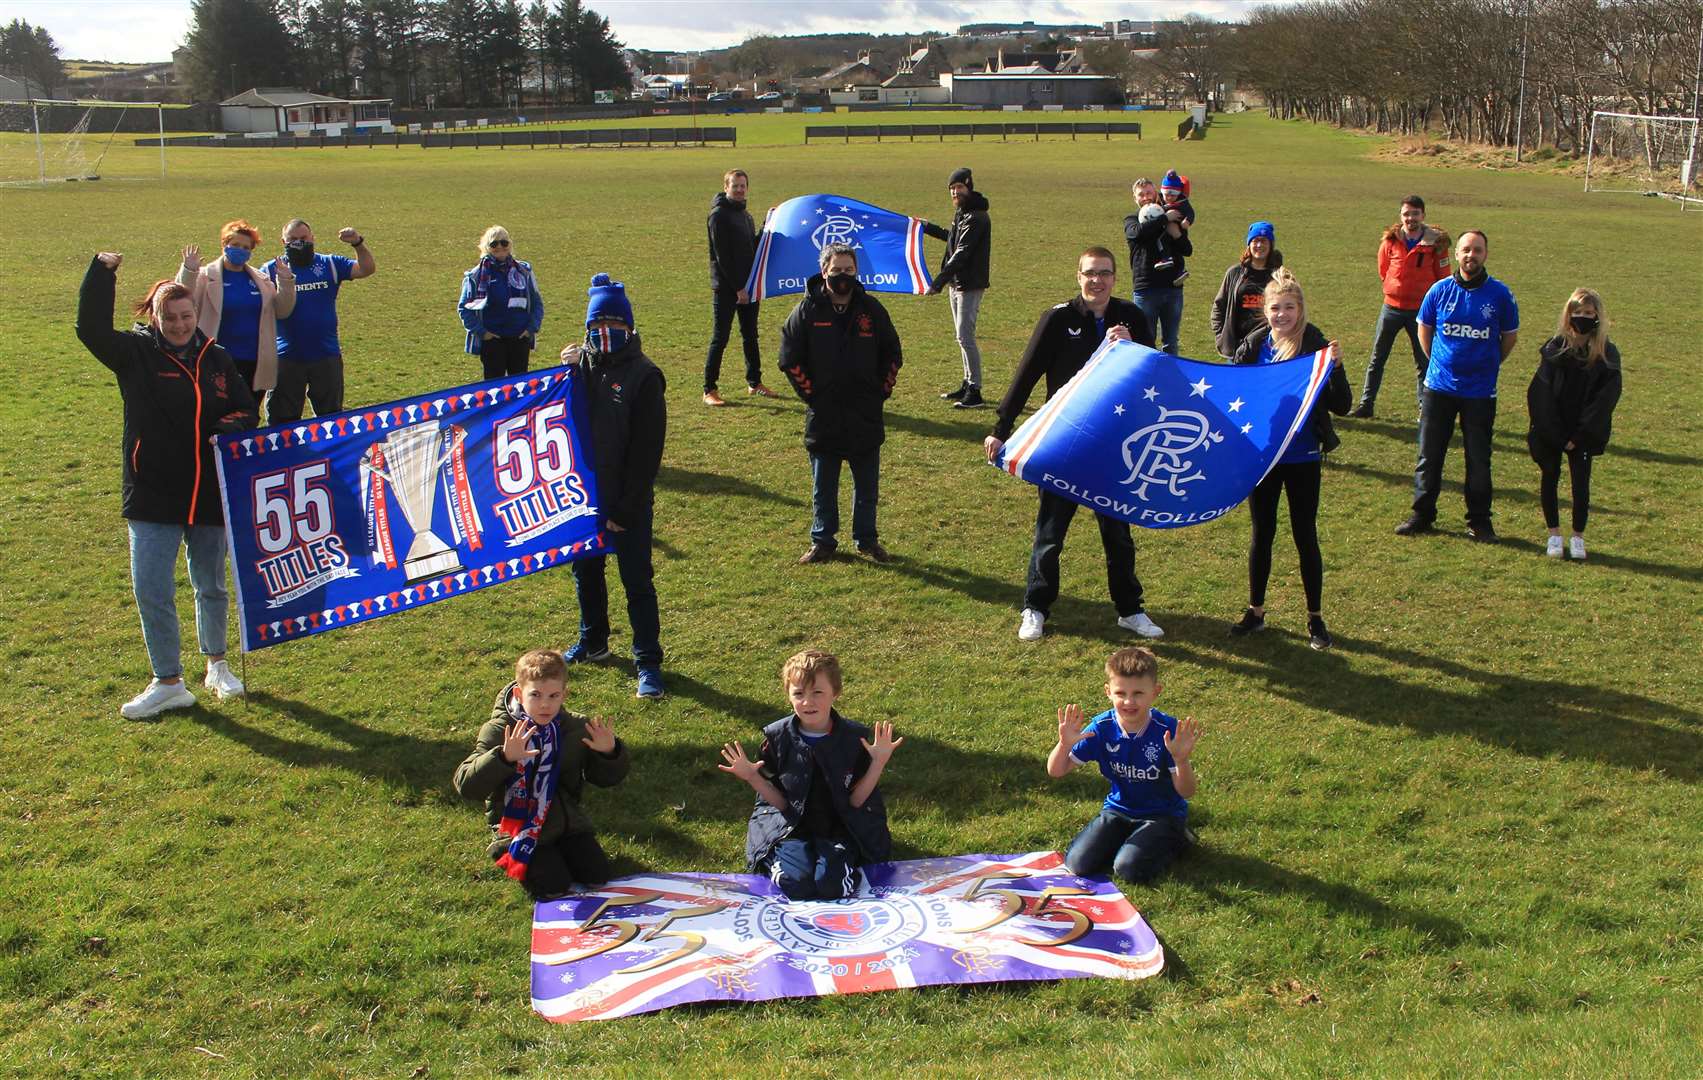 Rangers supporters at Sir George's Park on Saturday marking their team's Scottish Premiership title triumph.